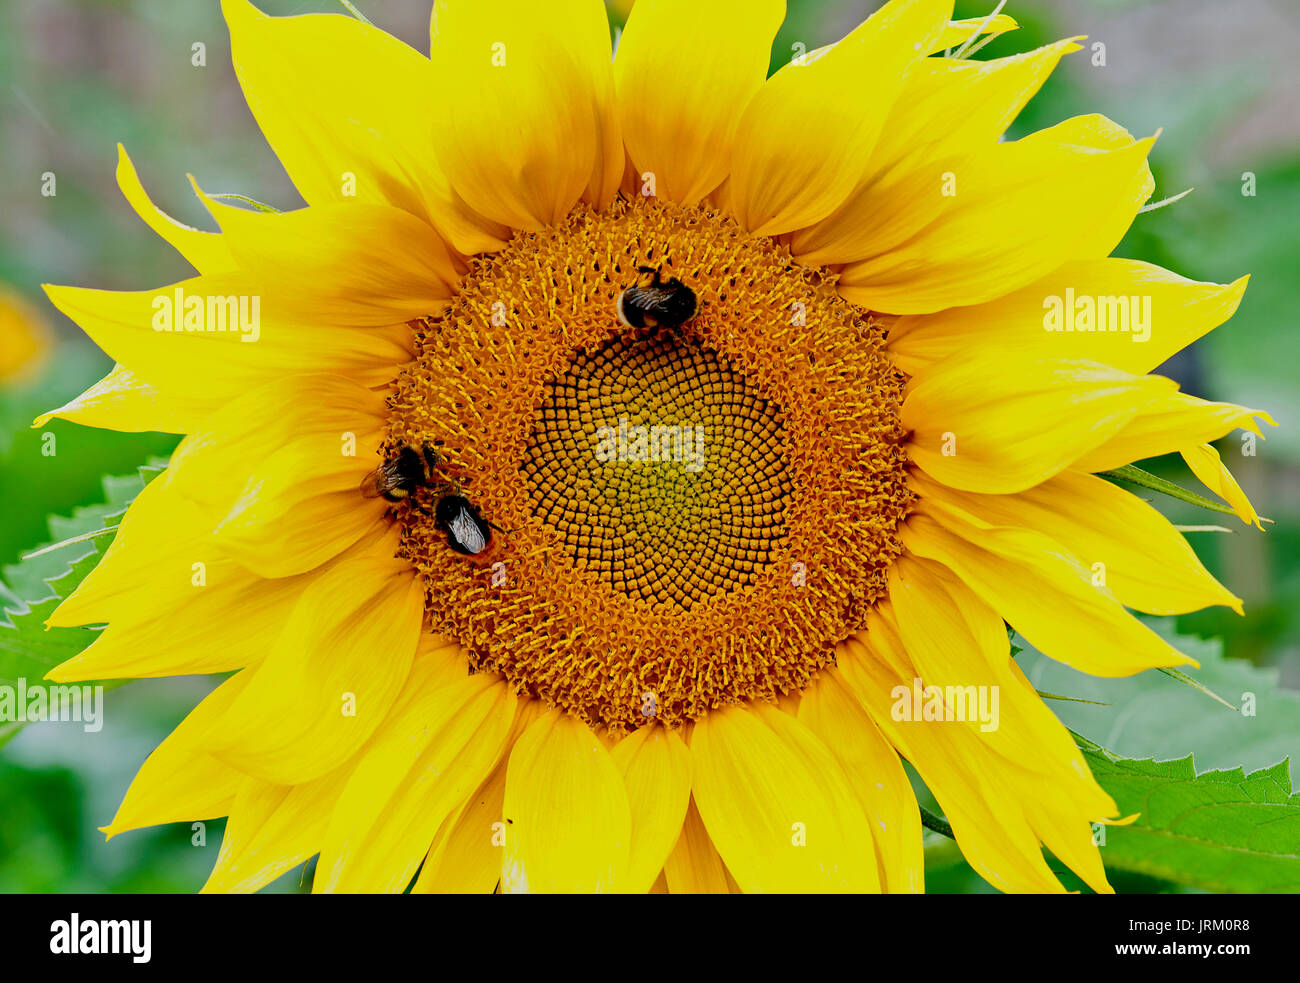 The large, bright yellow flower heads of sunflowers present a nectar and pollen mother lode for their pollinators, which are bees of all kinds. Stock Photo